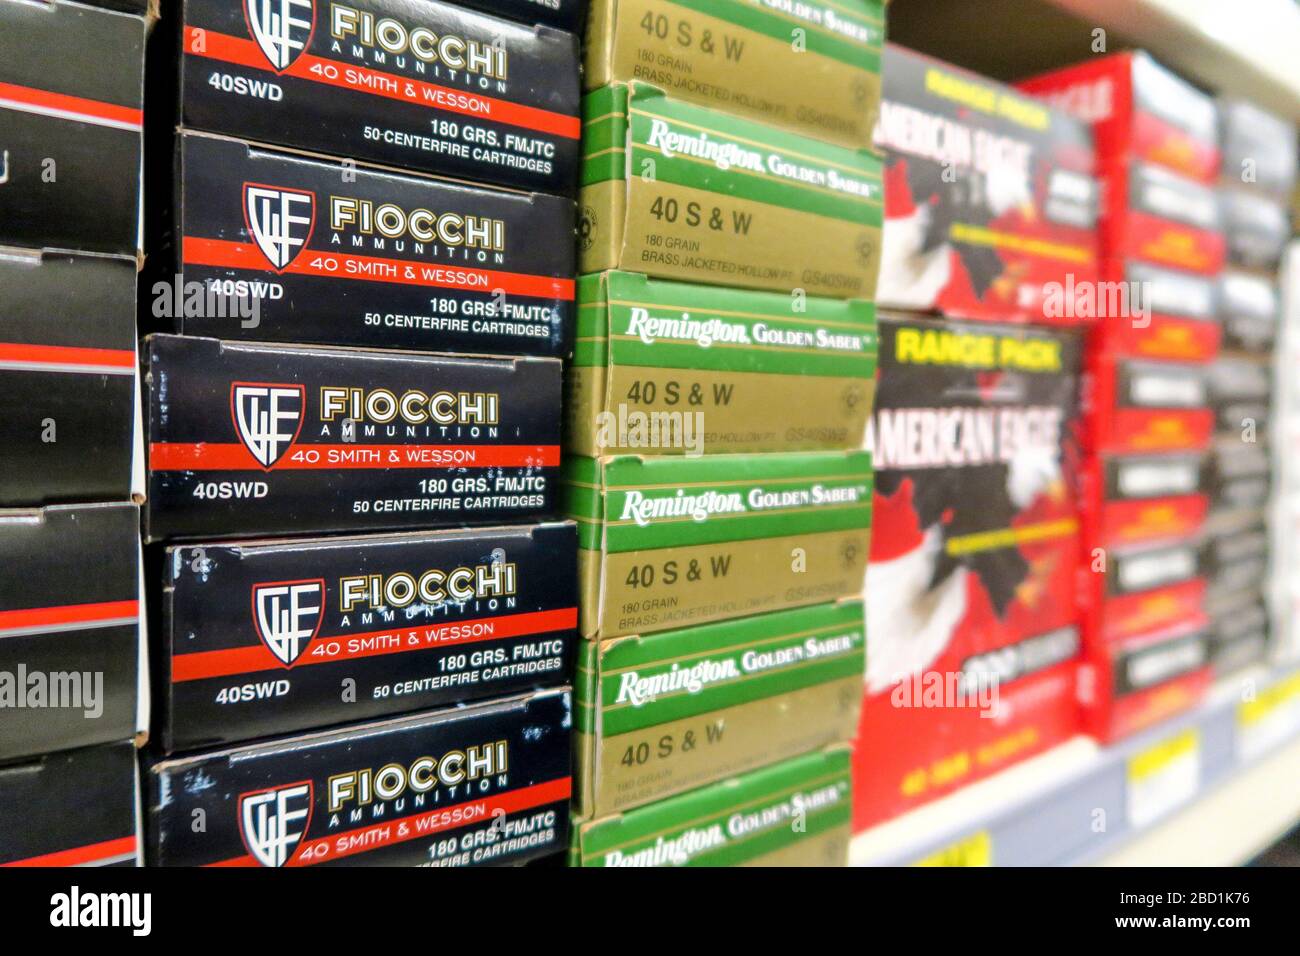 Boxed Ammo High Resolution Stock Photography and Images - Alamy